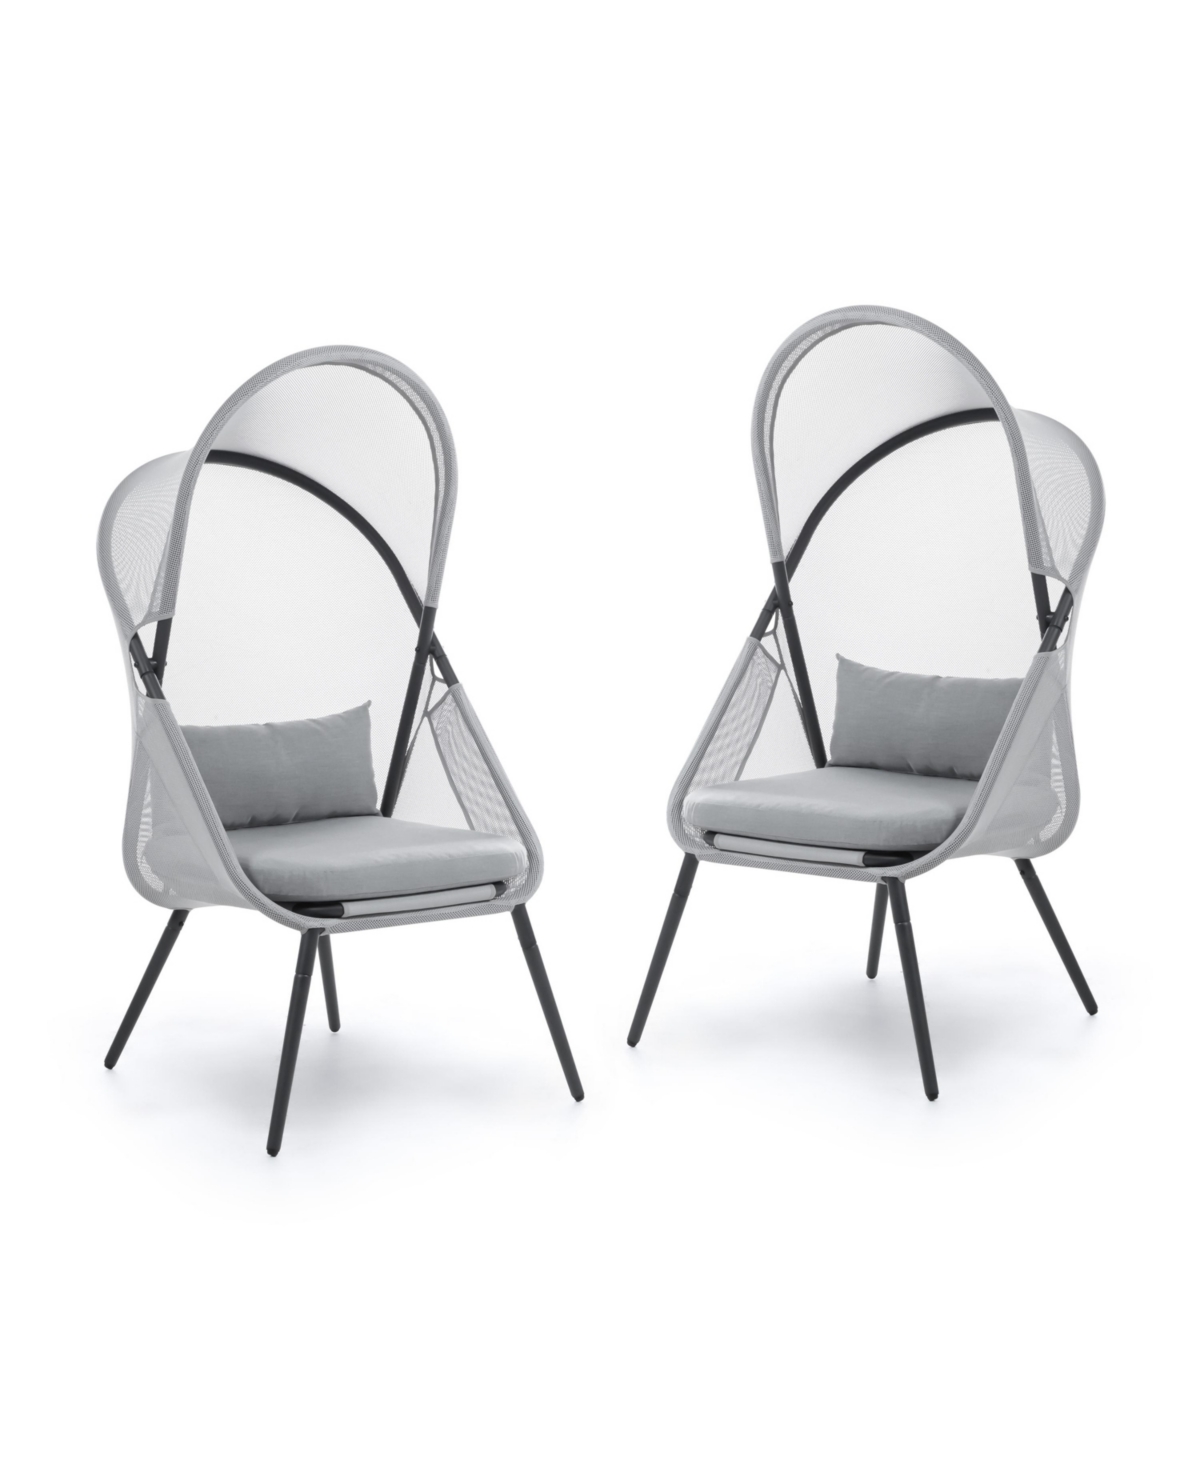 Furniture Of America 2 Piece Foldable Chairs With Mesh Canopy Cushions In Light Gray